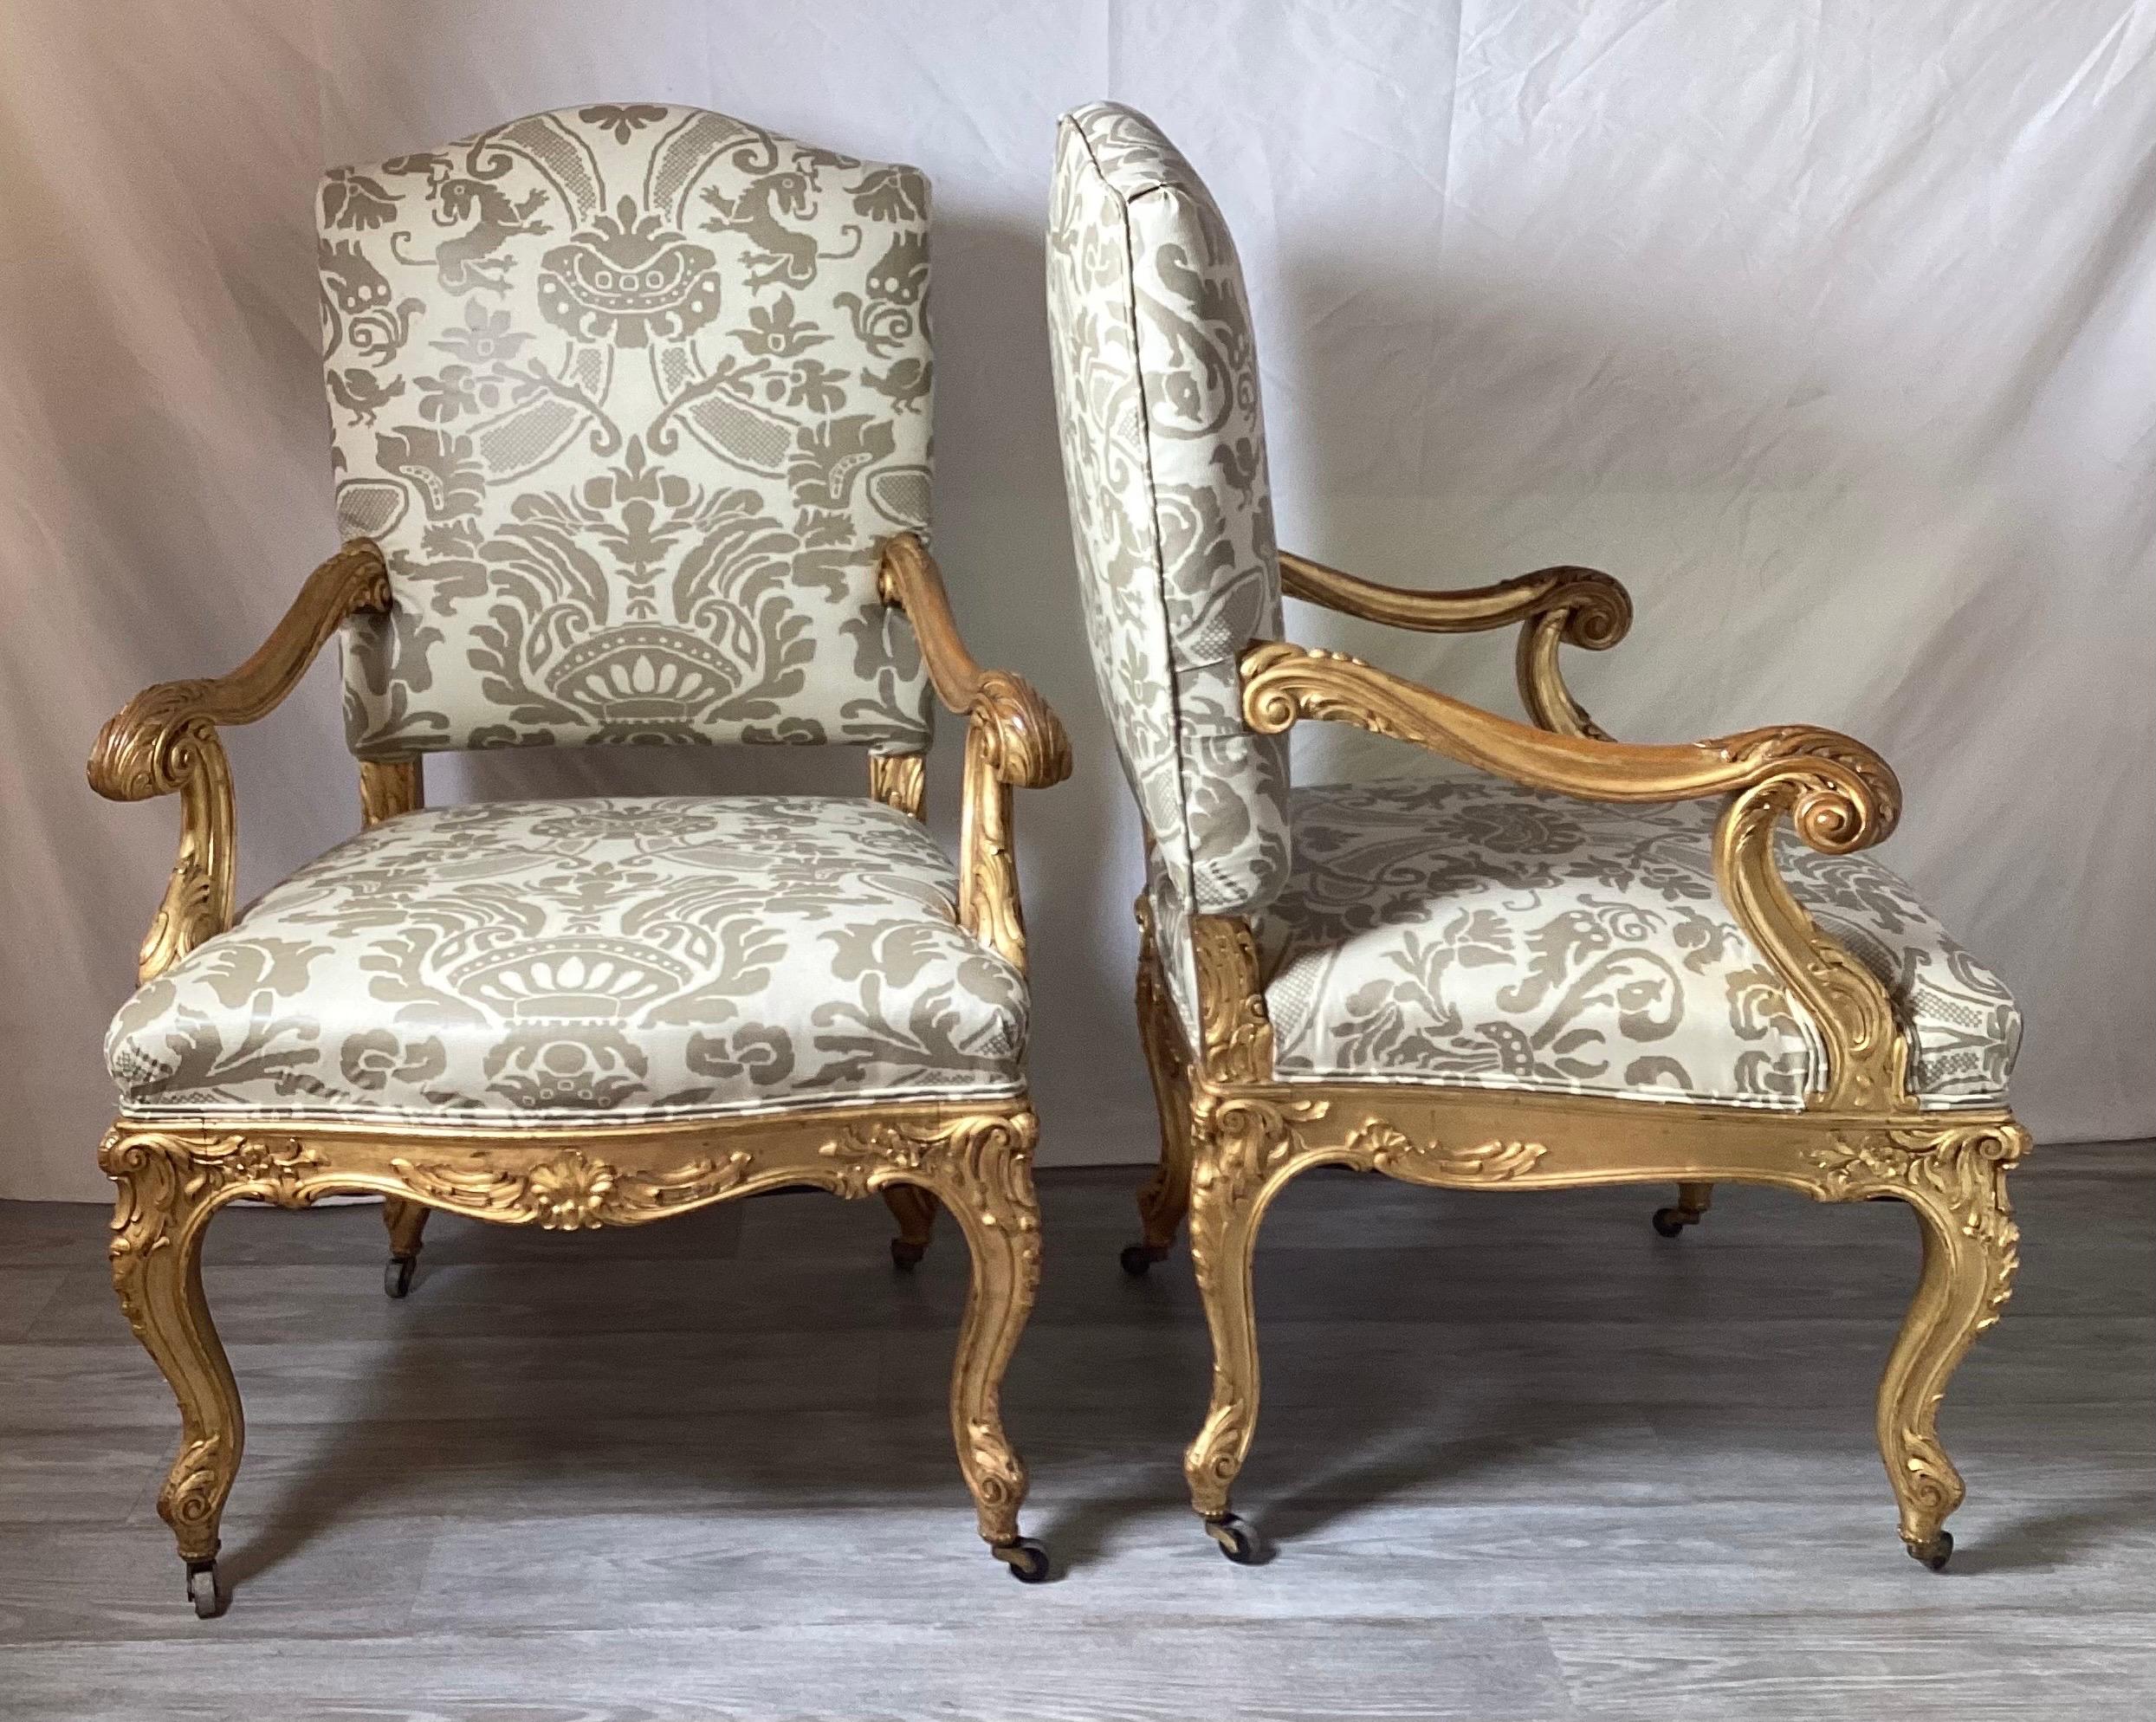 Hand-Carved Pair of 19th Century Giltwood Fauteuils Upholstered Chairs For Sale